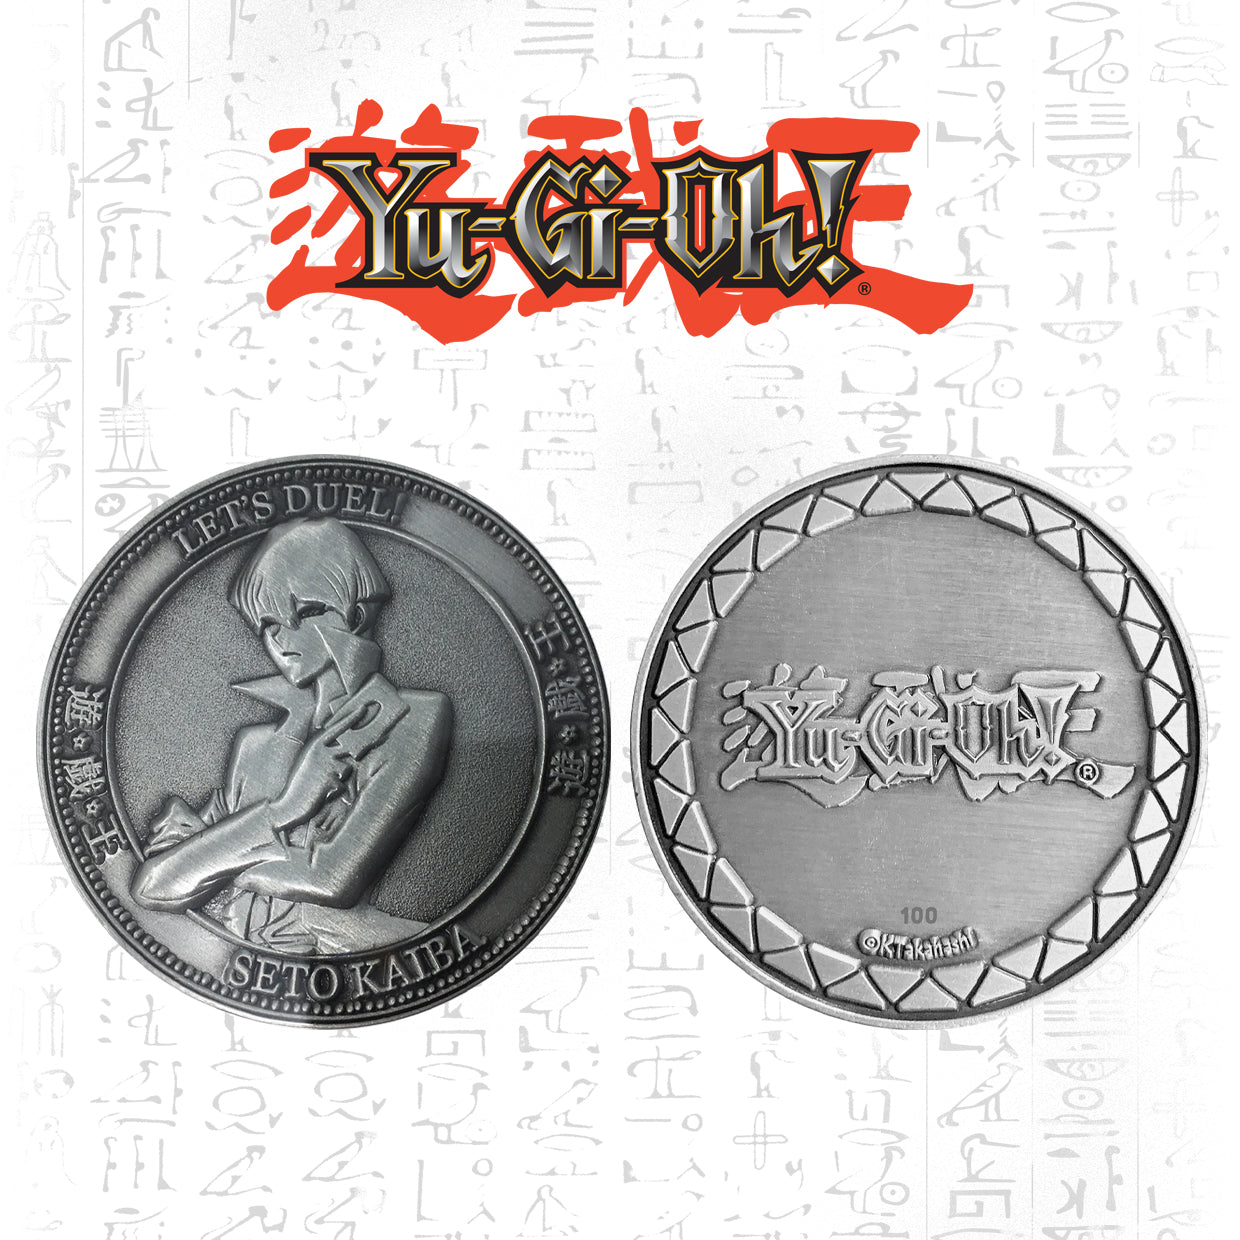 Yu-Gi-Oh! Limited Edition Kaiba Collectible Coin